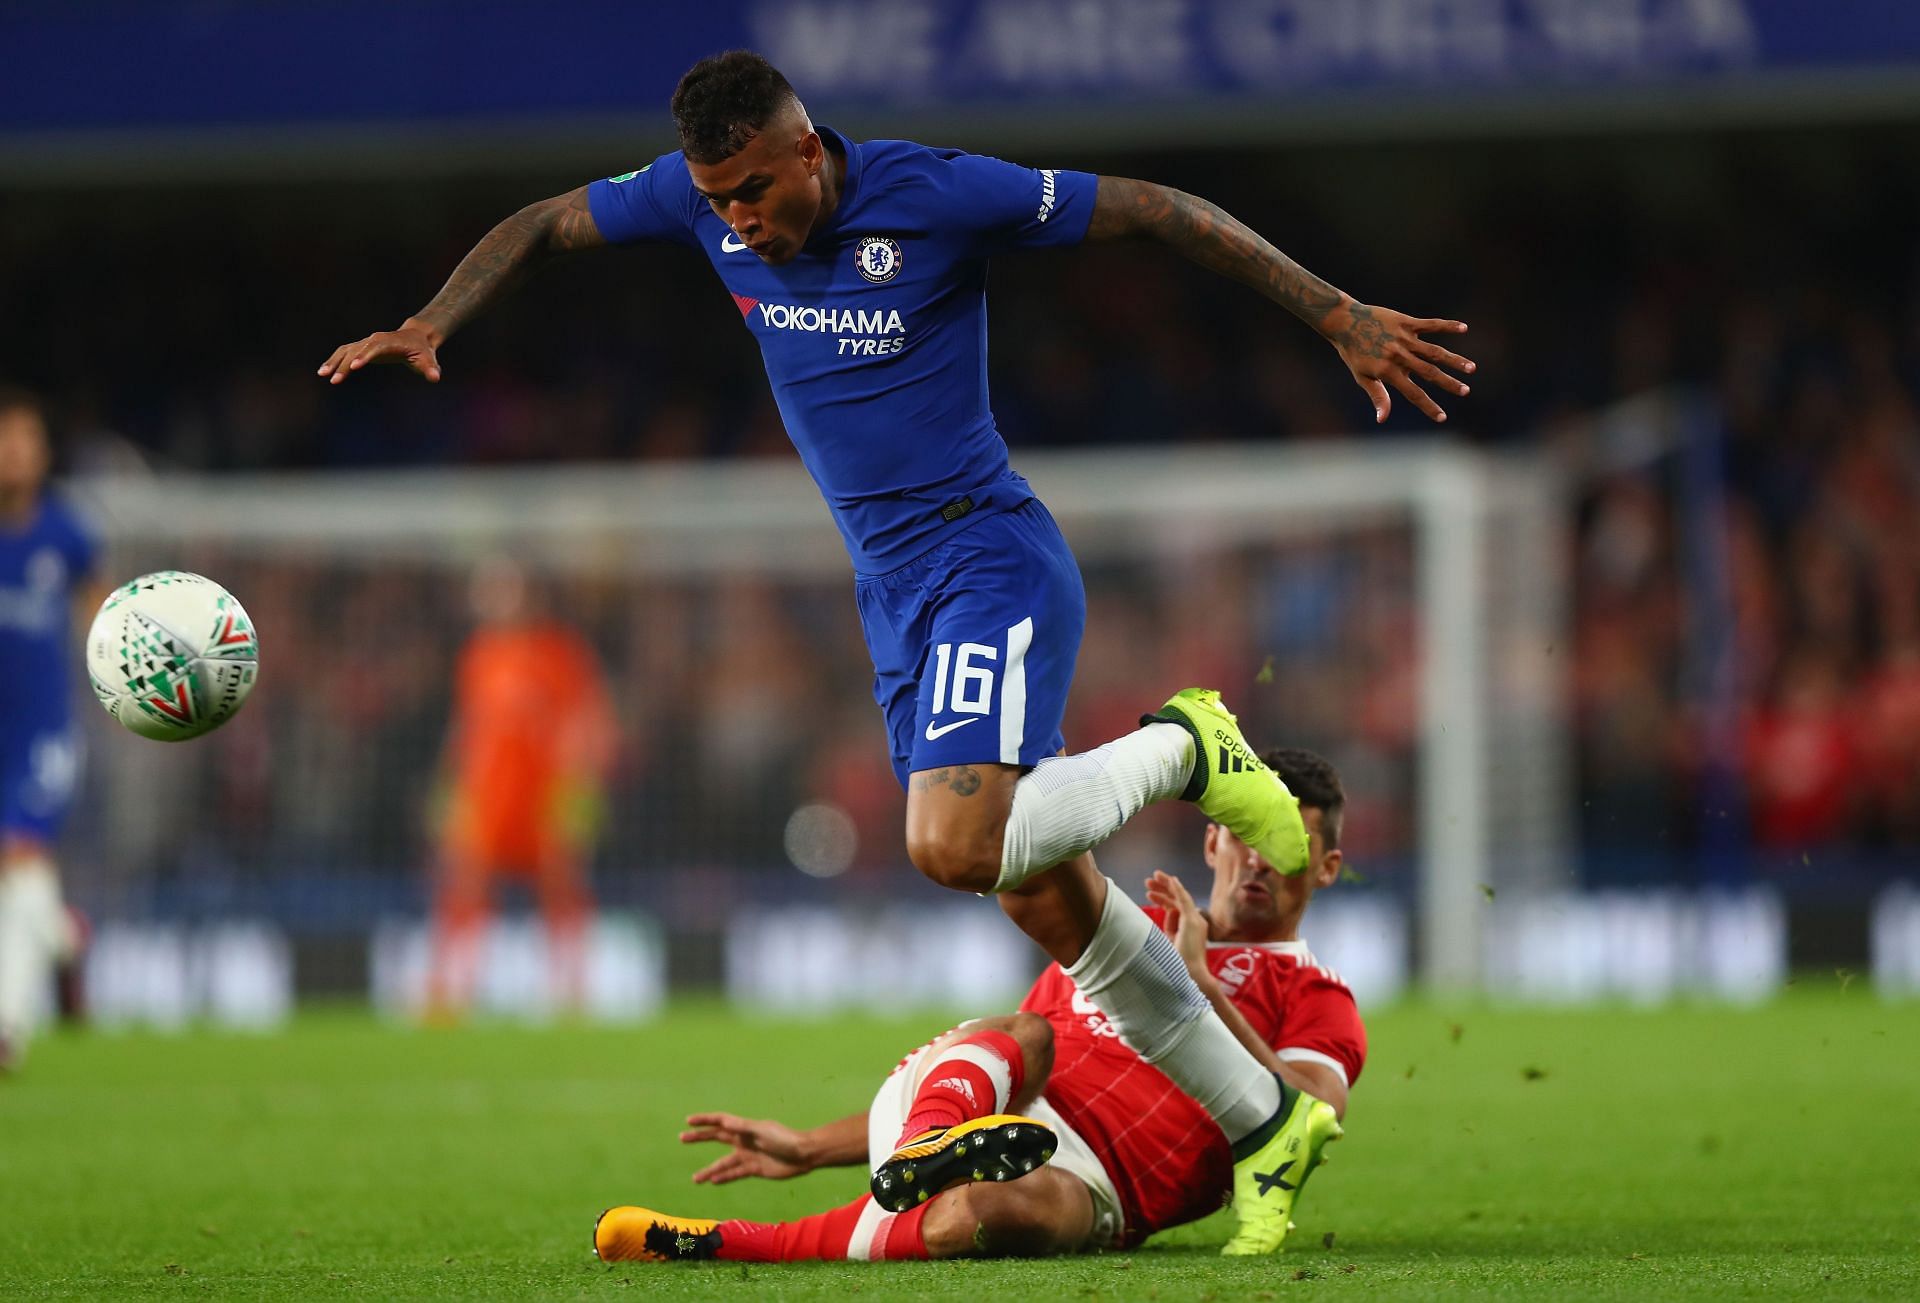 Kenedy has played only two games this season for Chelsea